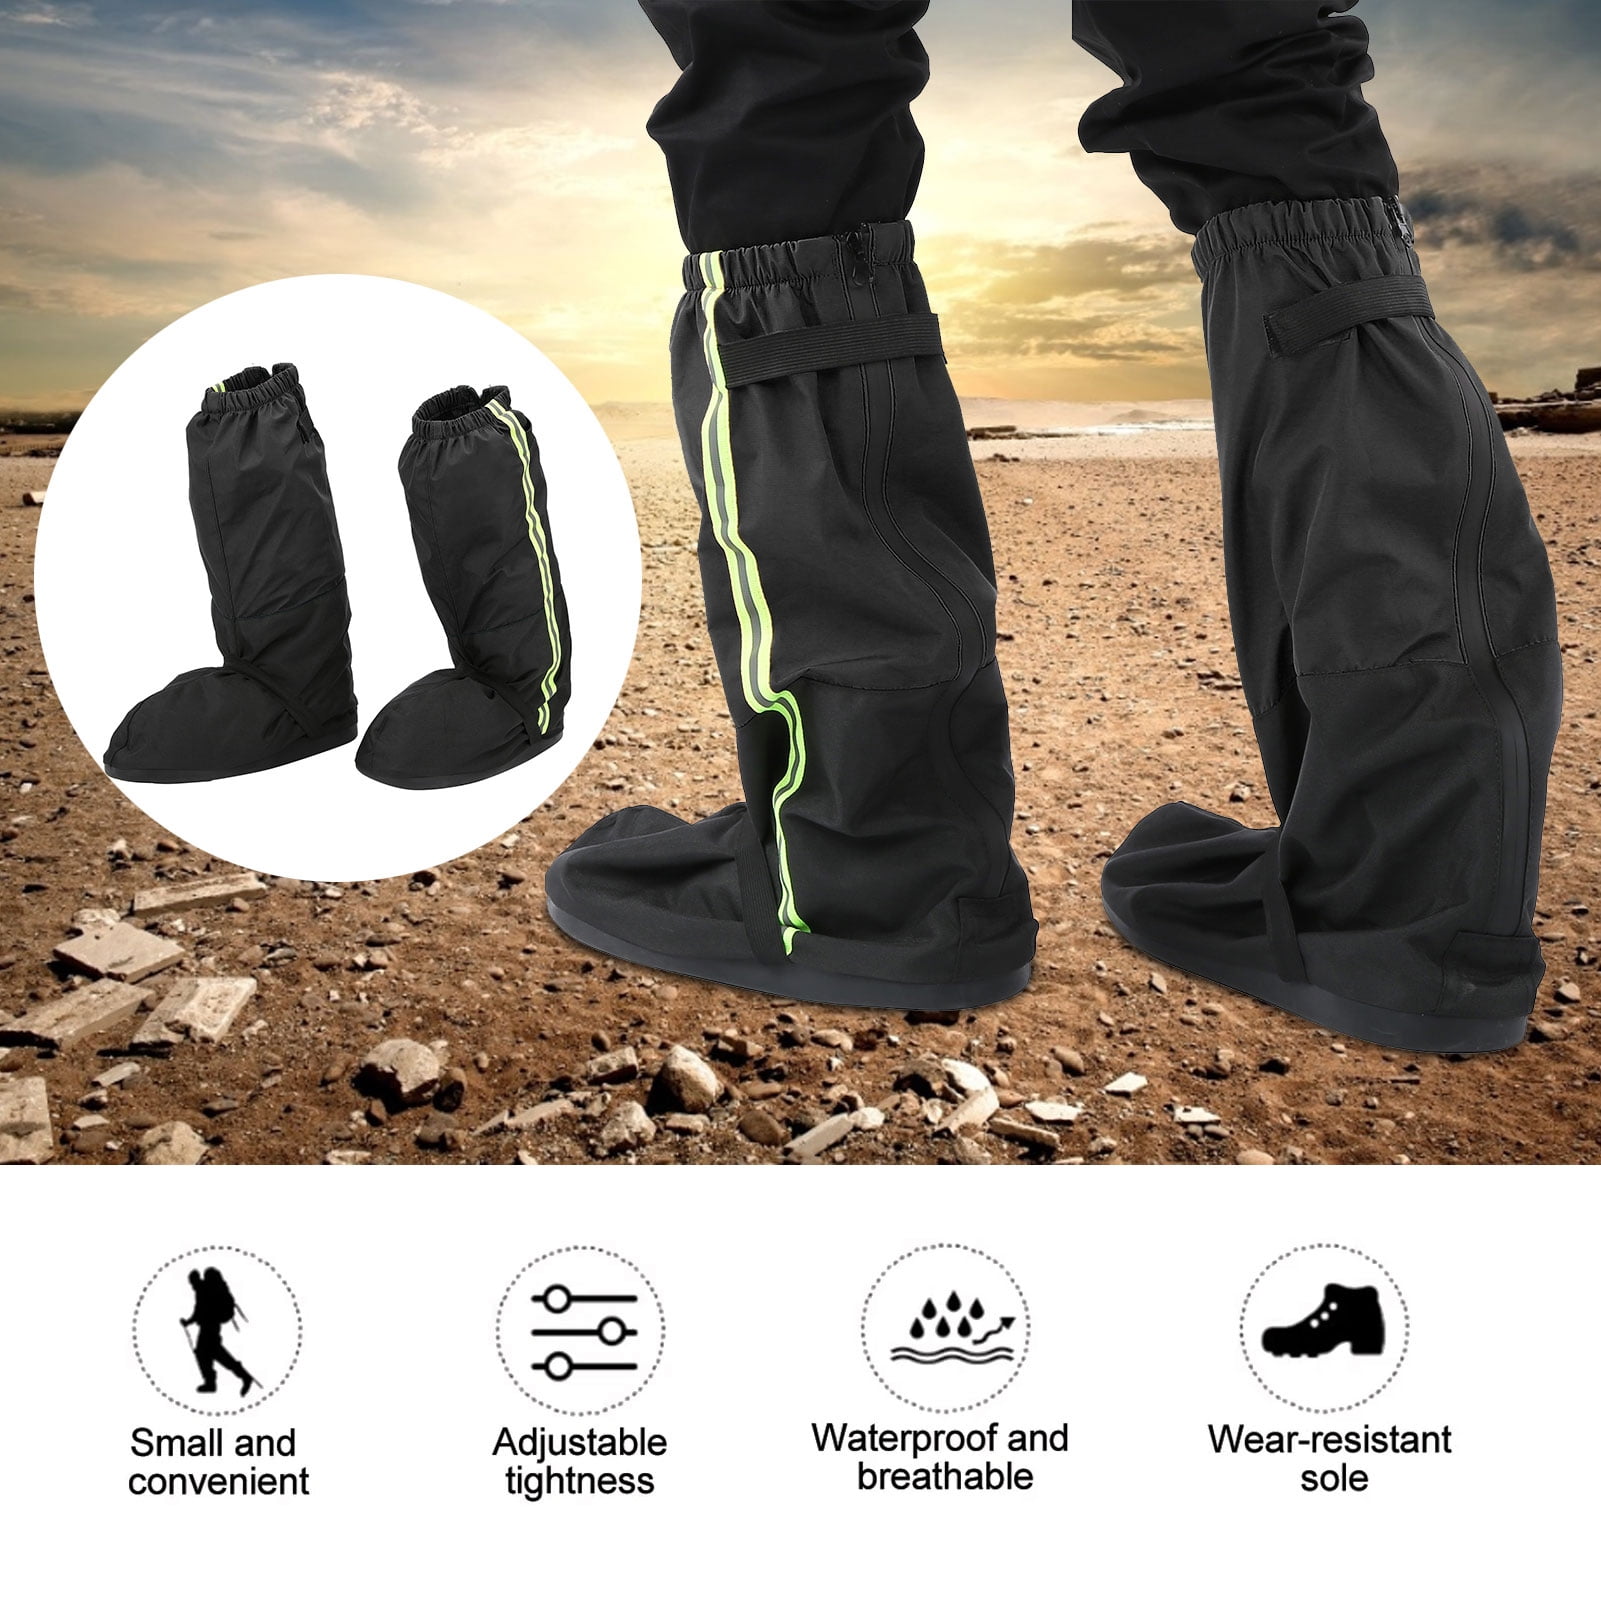 Net Sack Details about   Outdoor High Quality Hiking Waterproof Anti-Sand High Tube Foot Cover 